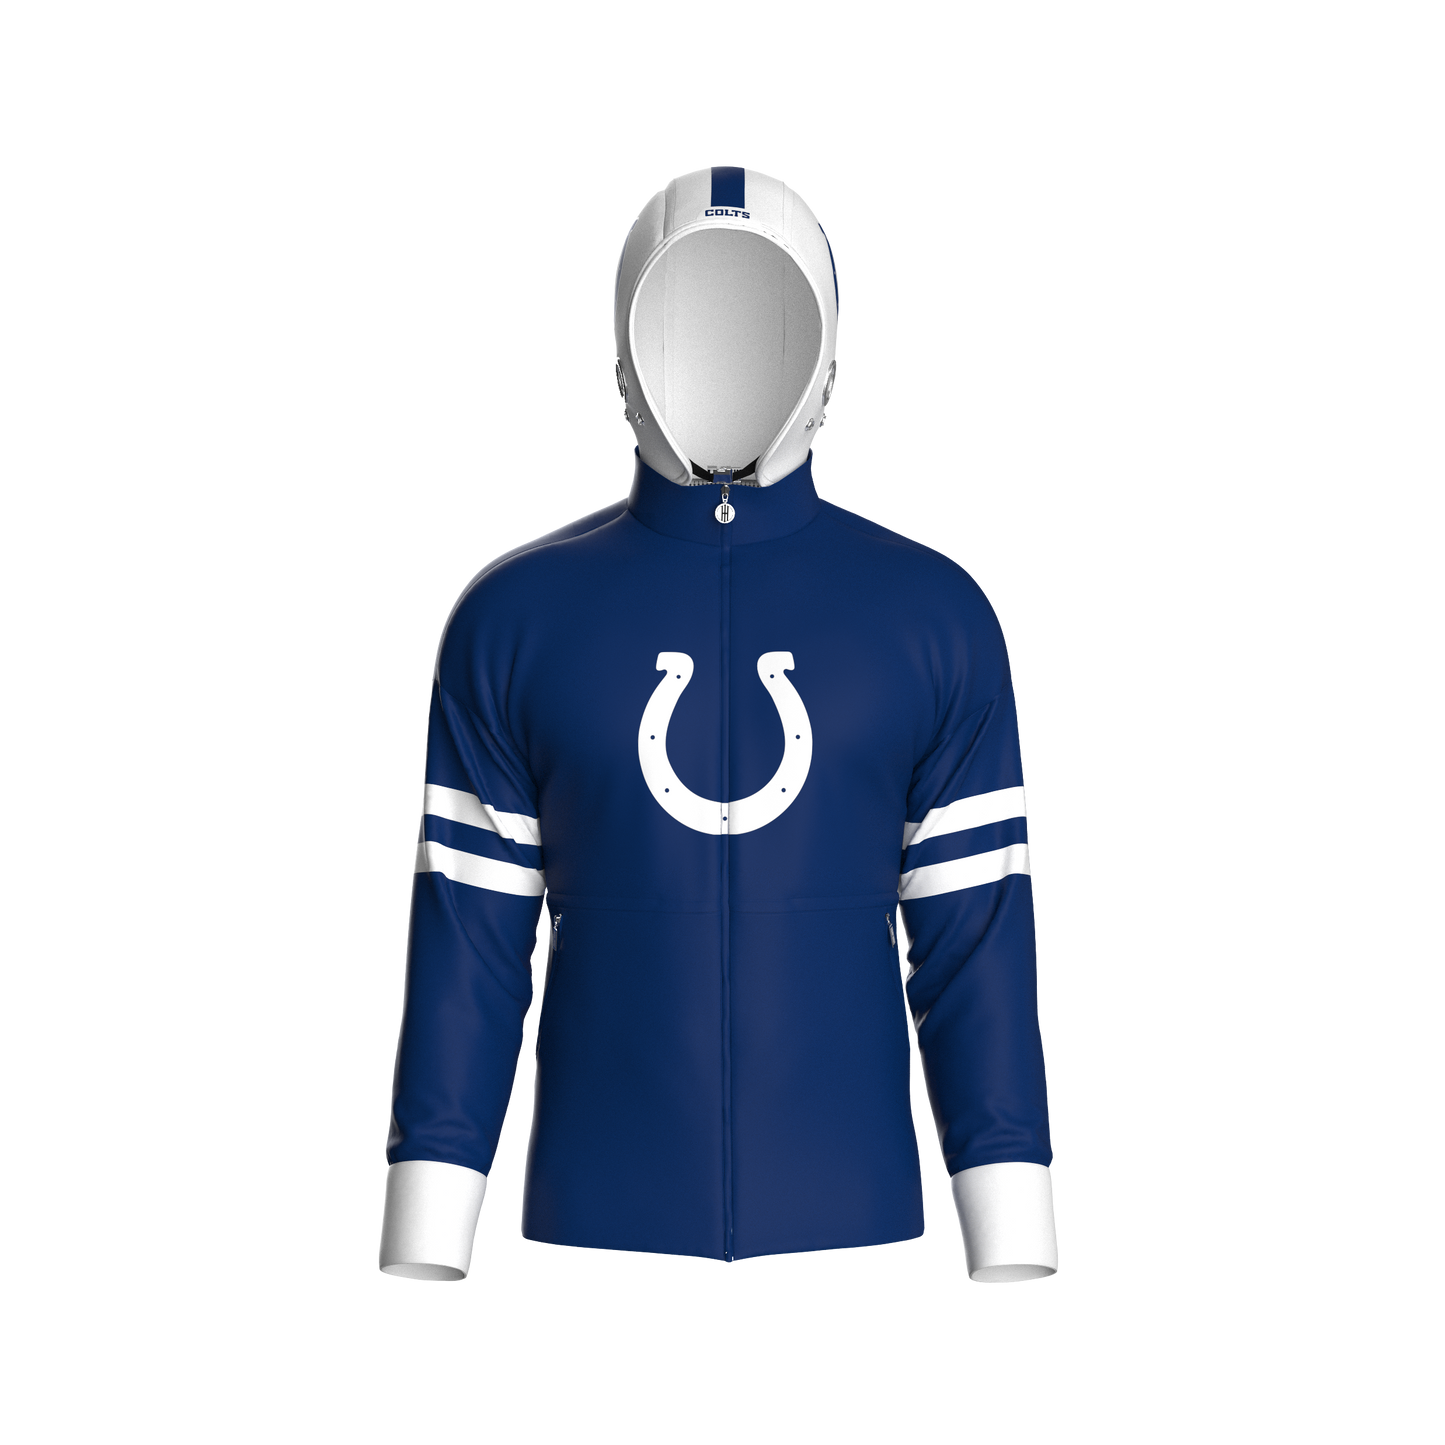 Indianapolis Colts Home Zip-Up (youth)